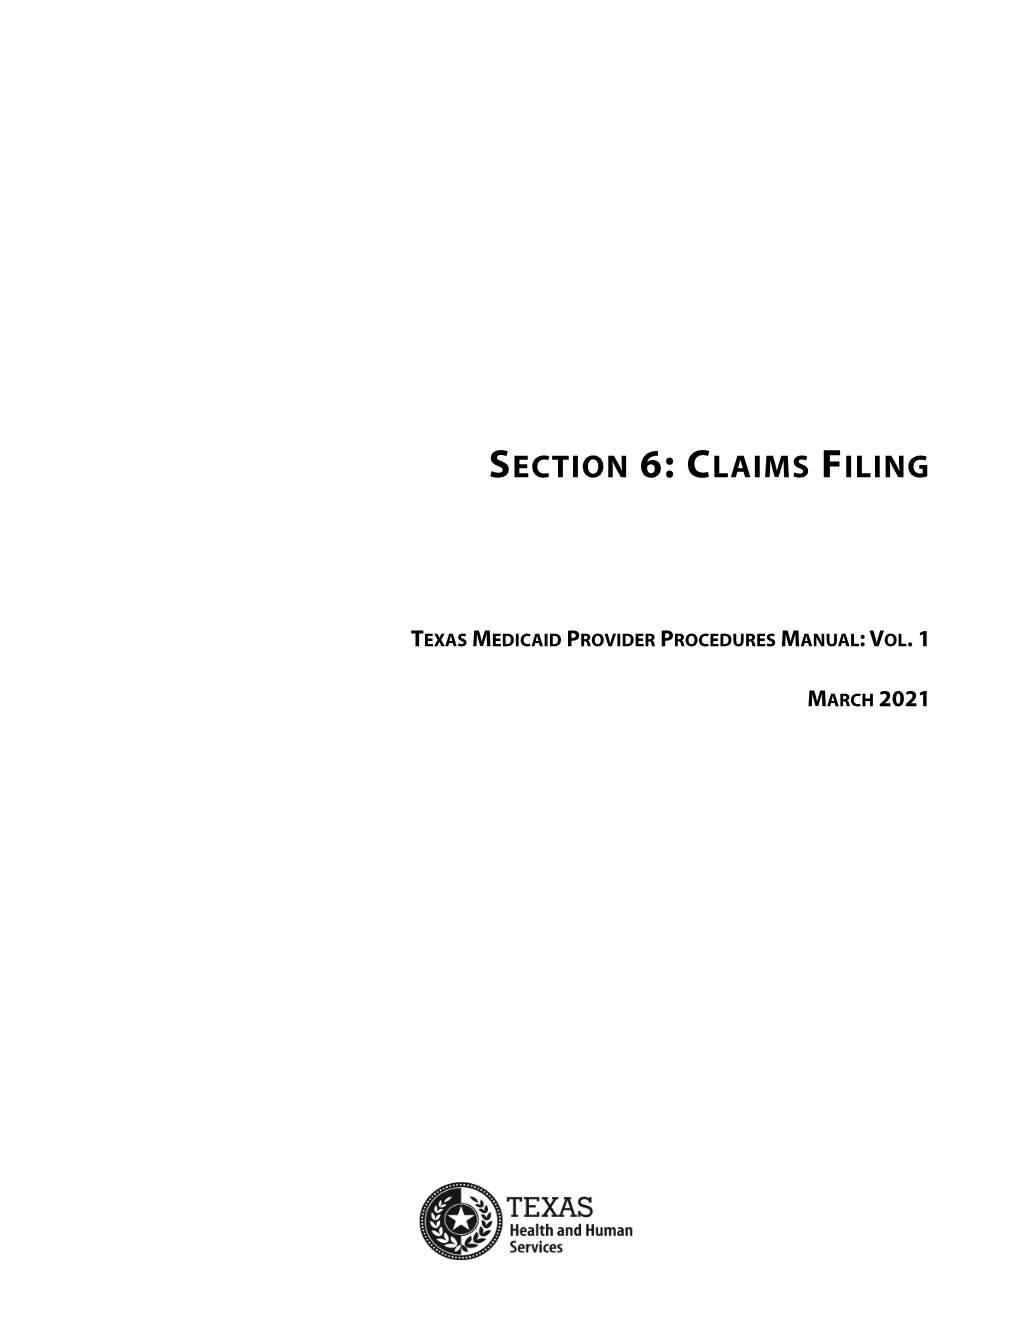 Section 6: Claims Filing